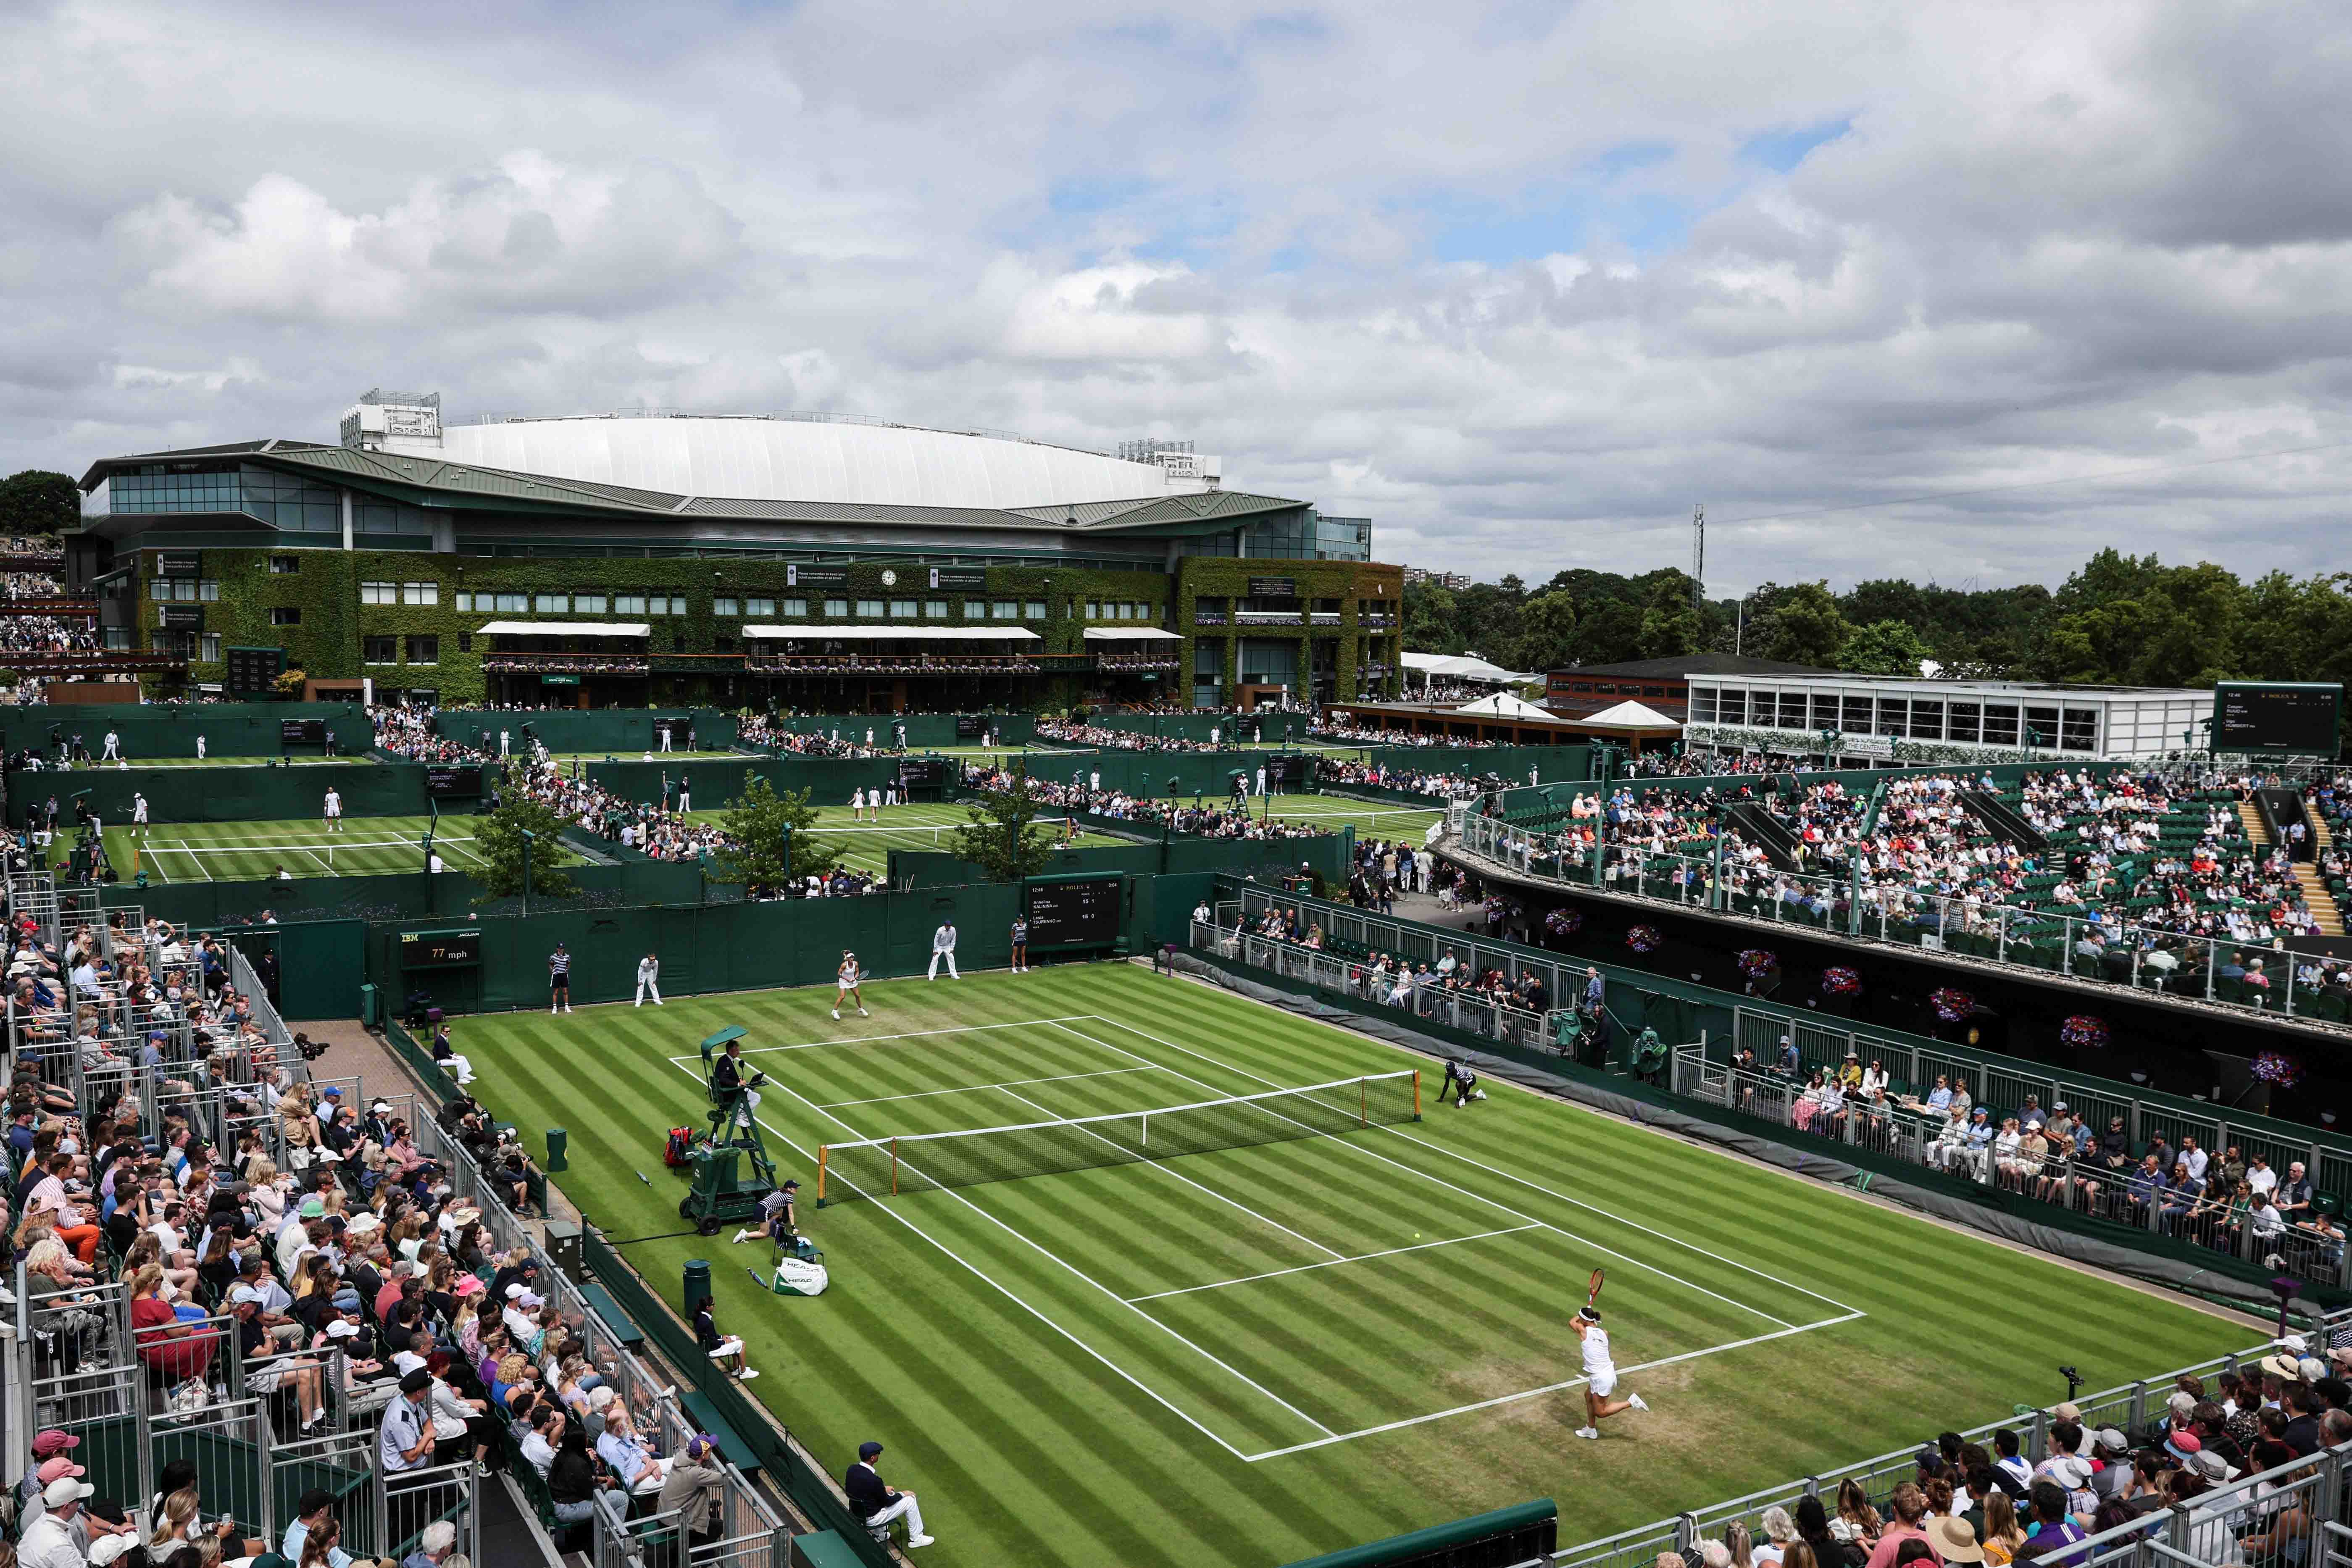 When is Wimbledon 2023? Dates, times and qualifying